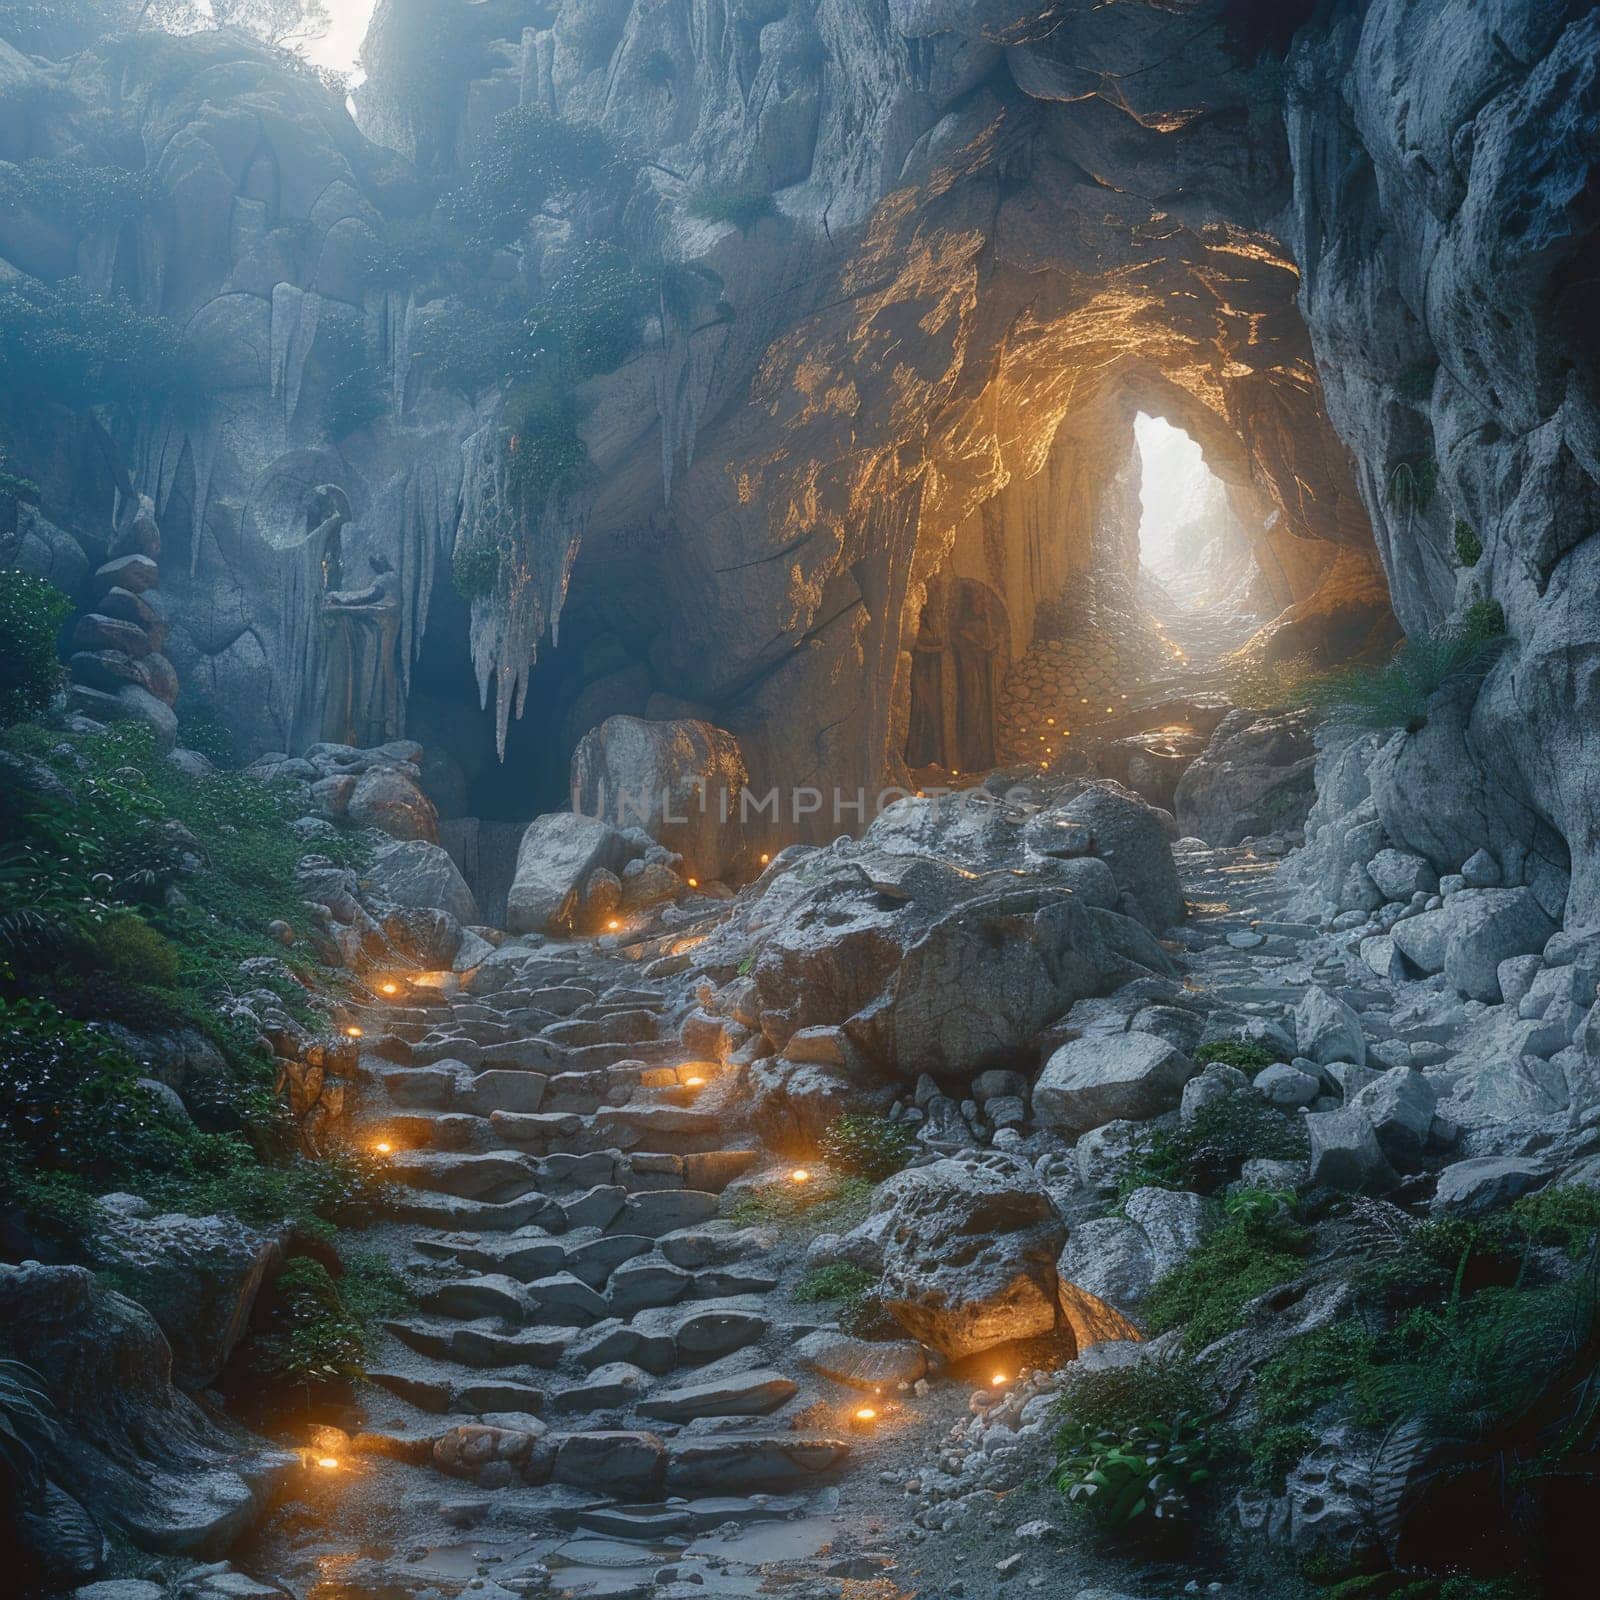 A set of stairs descending into a cave entrance.